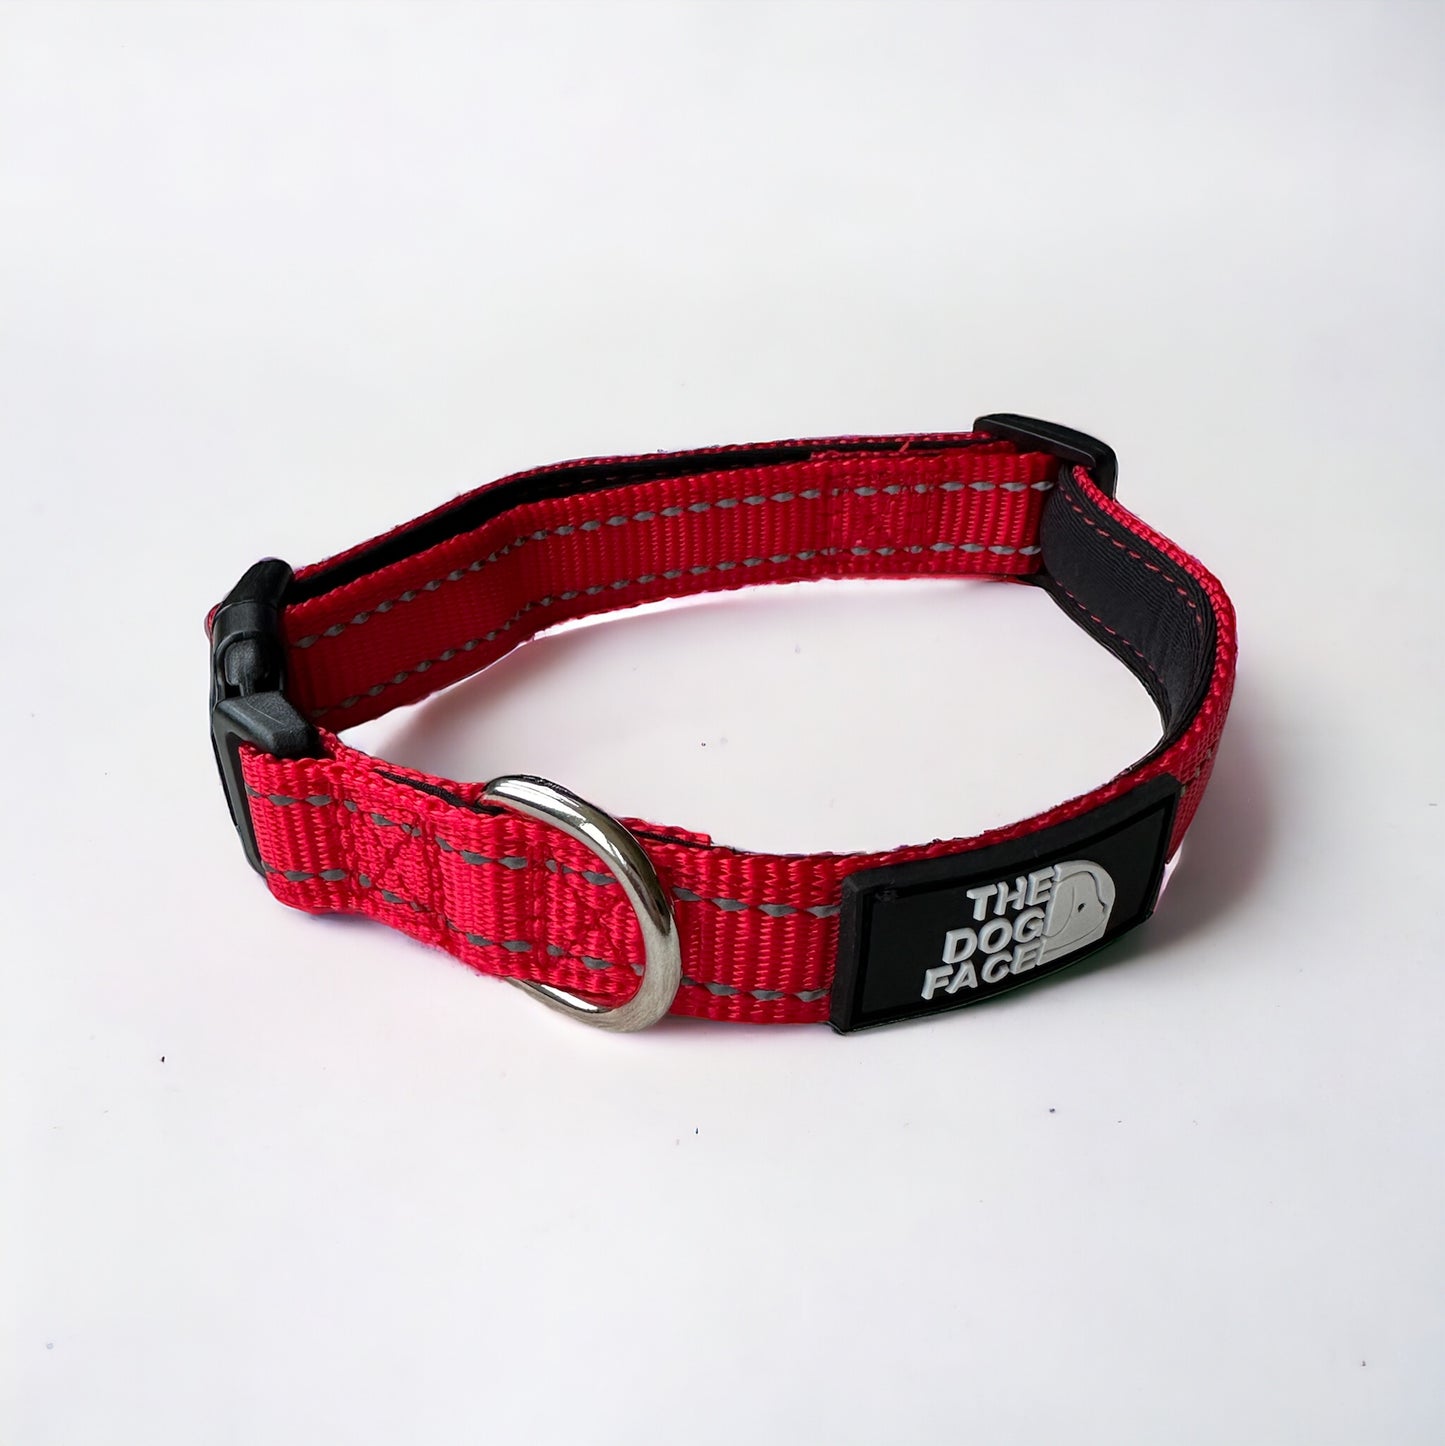 Padded Reflective Collar - Red by The Dog Face